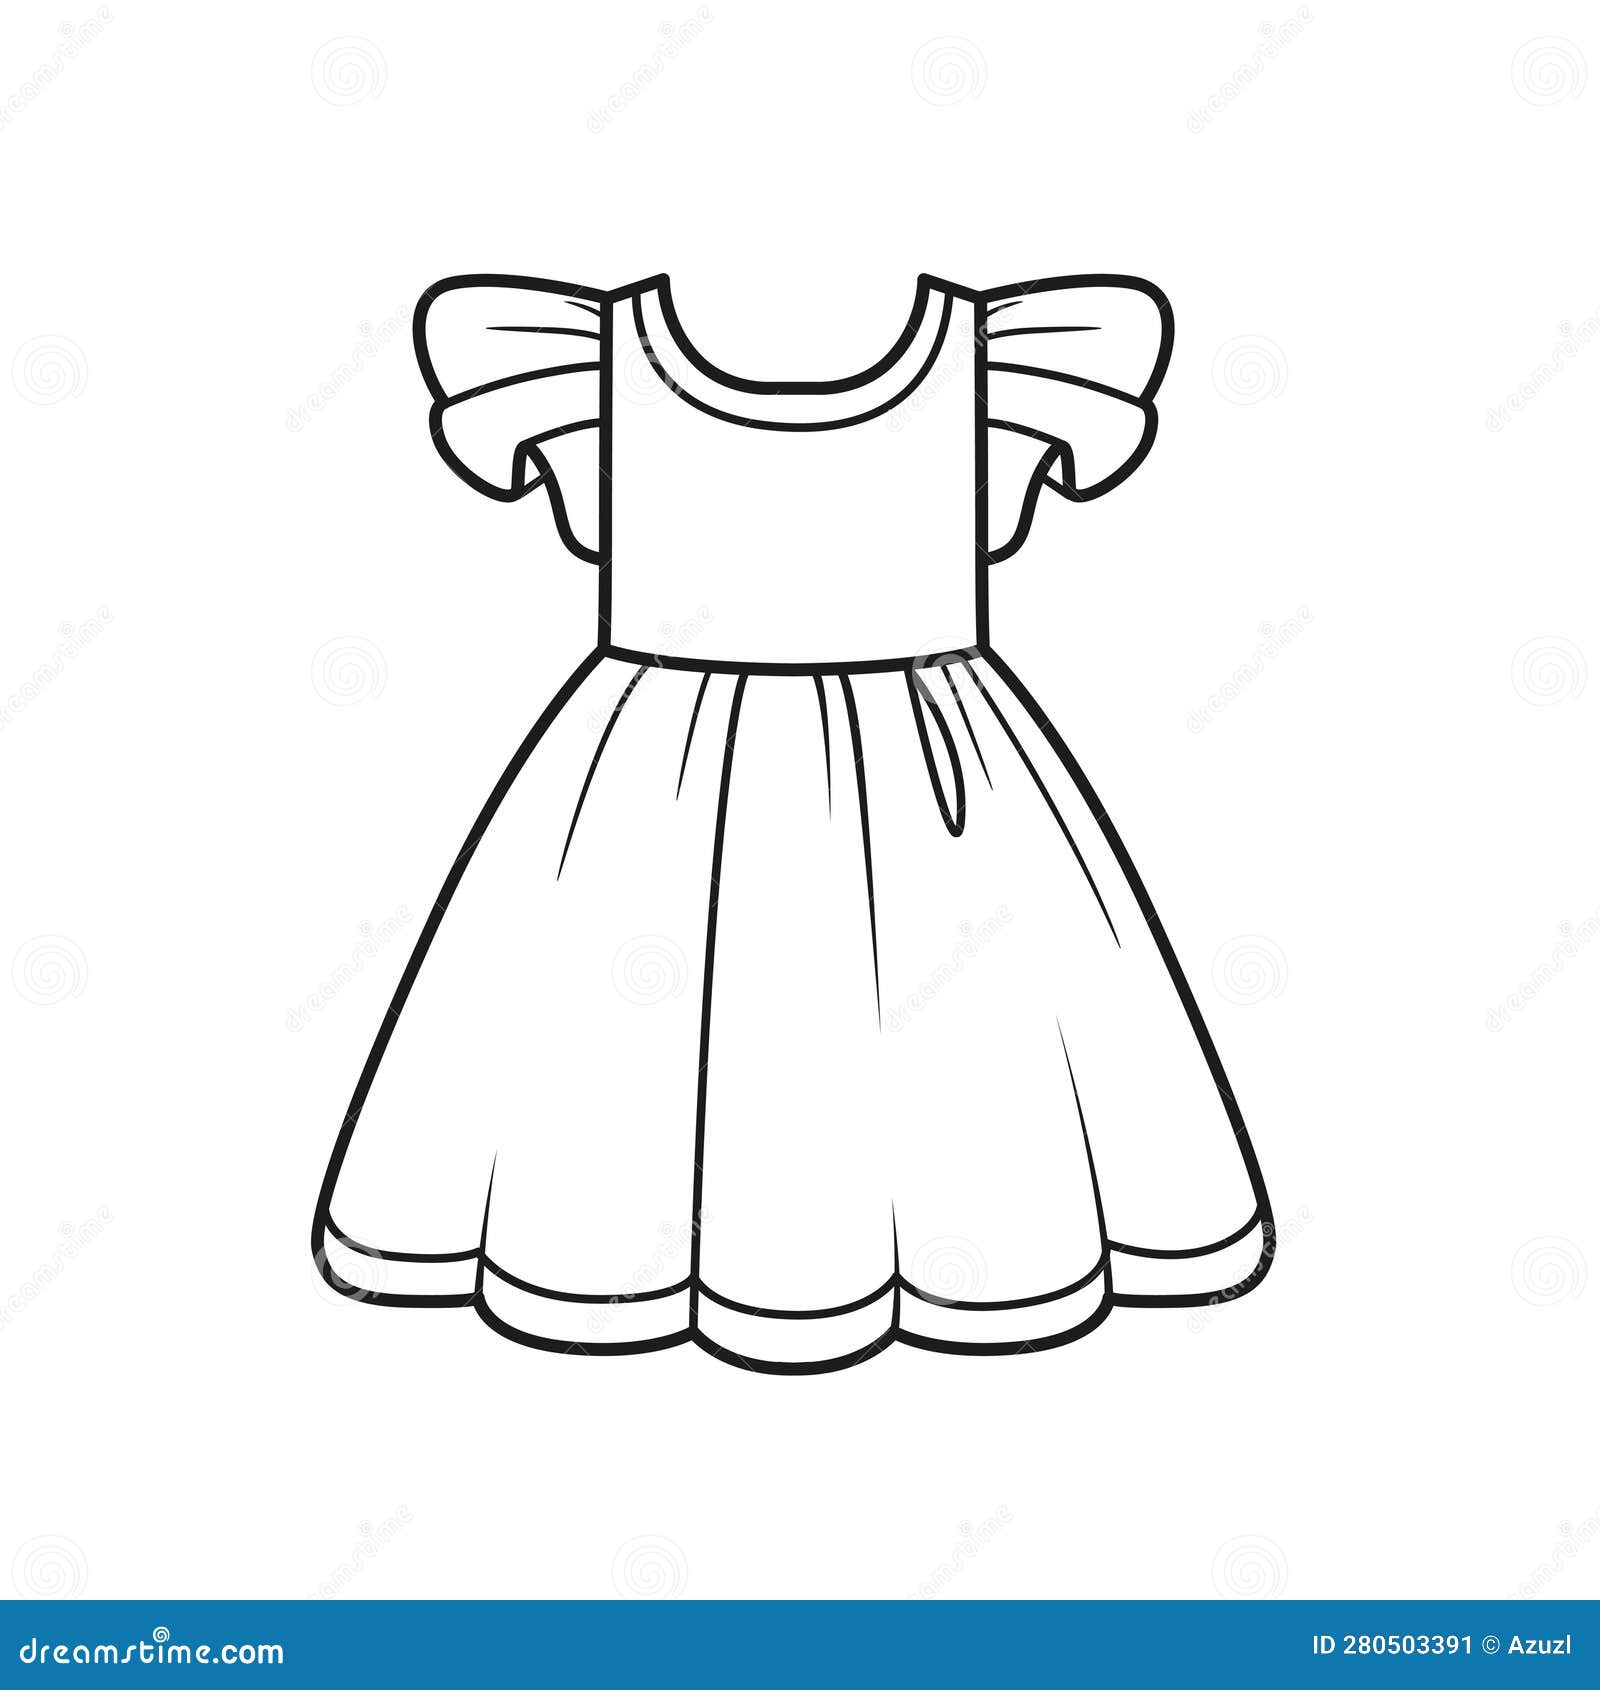 Beautiful Dress Outline for Coloring Page on a White Stock Vector - Illustration of coloring ...